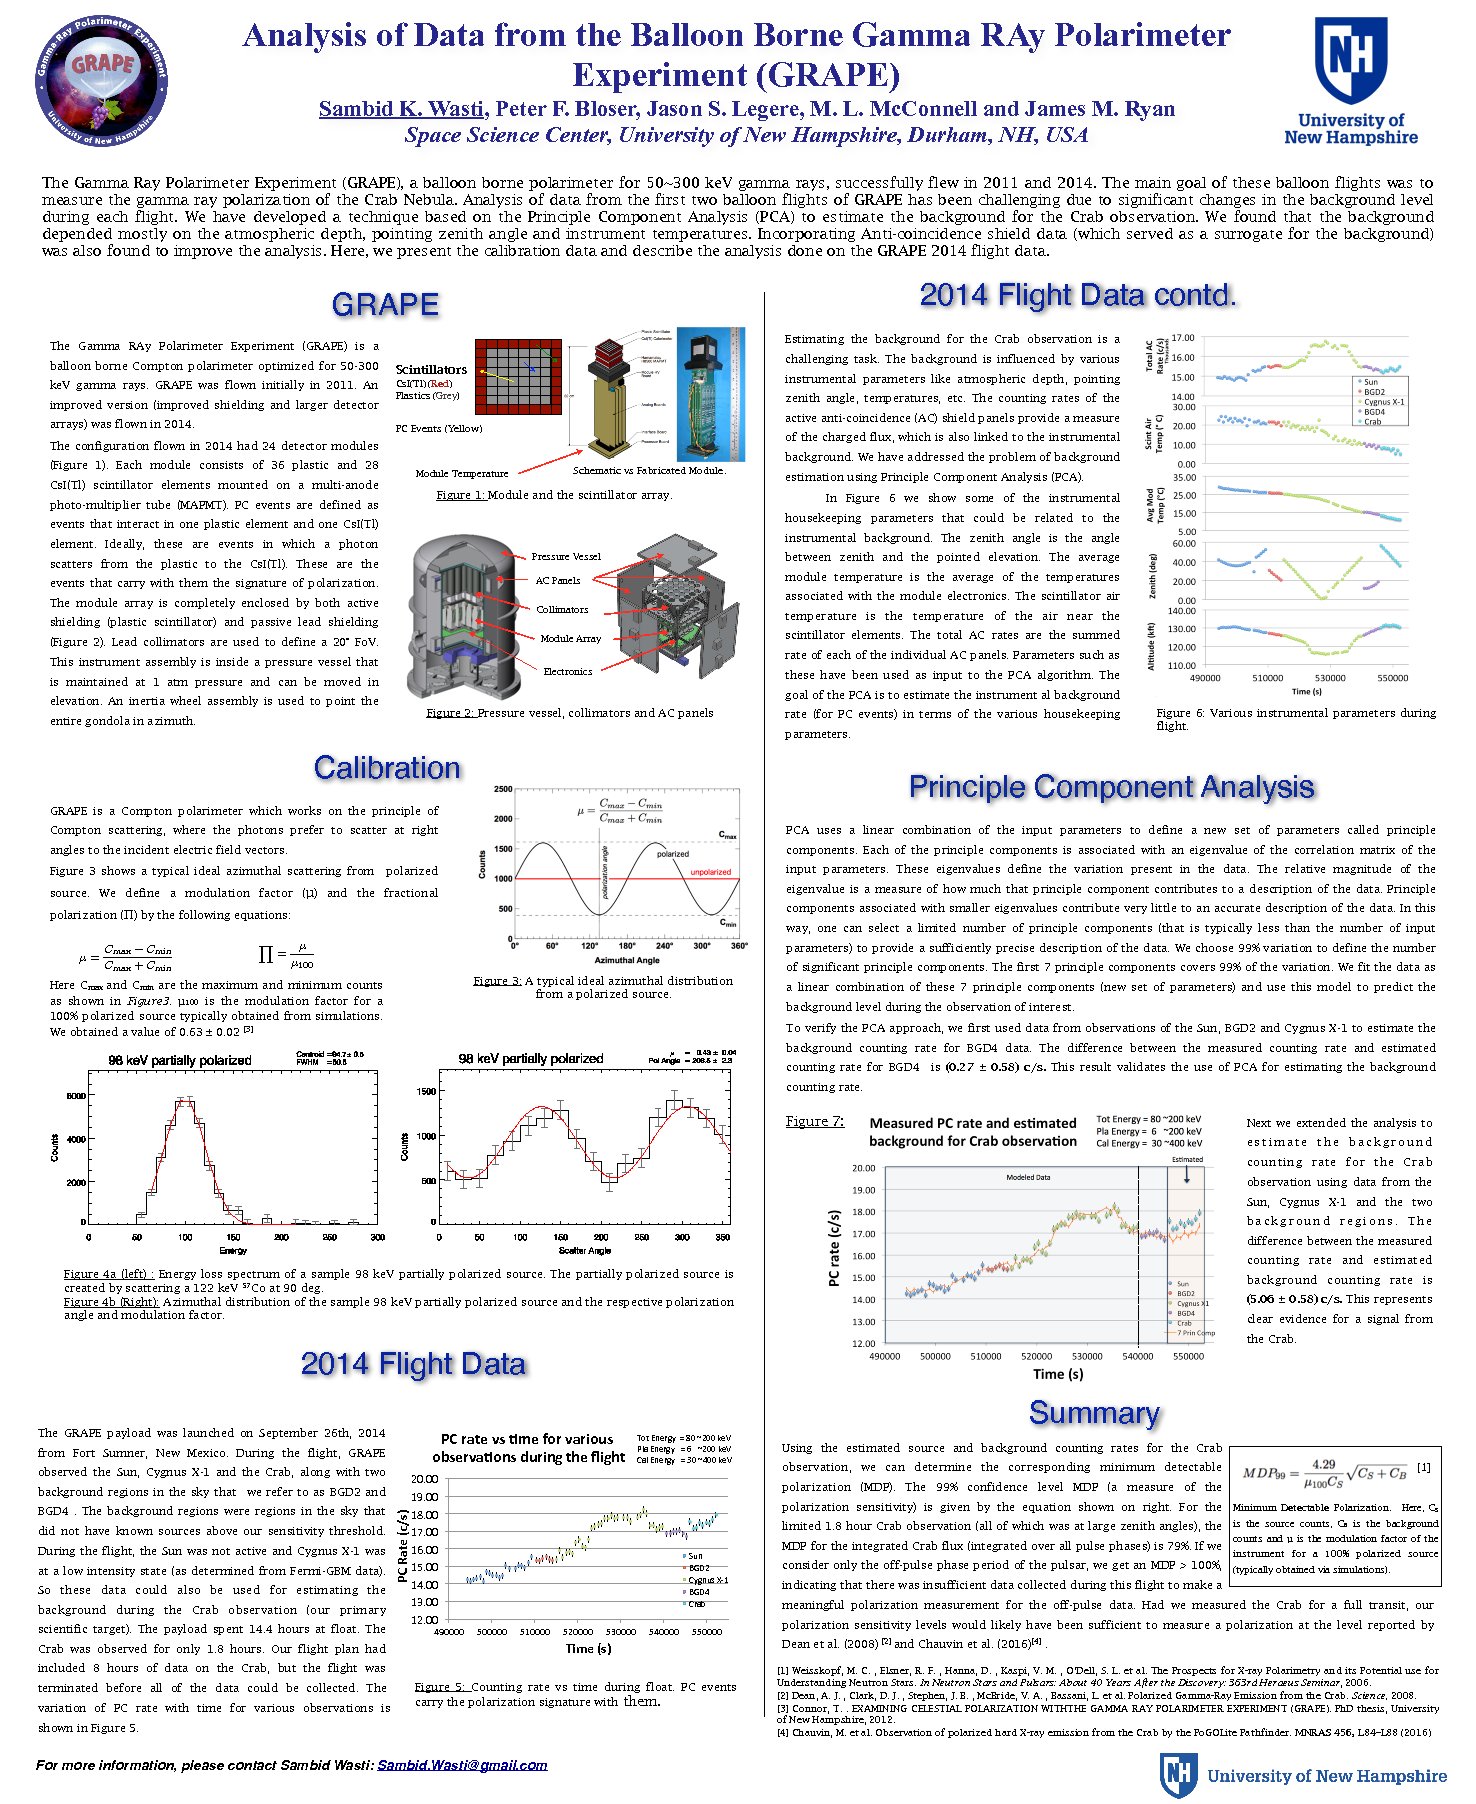 Analysis Of Data From The Balloon Borne Gamma Ray Polarimeter Experiment (Grape) by skg45